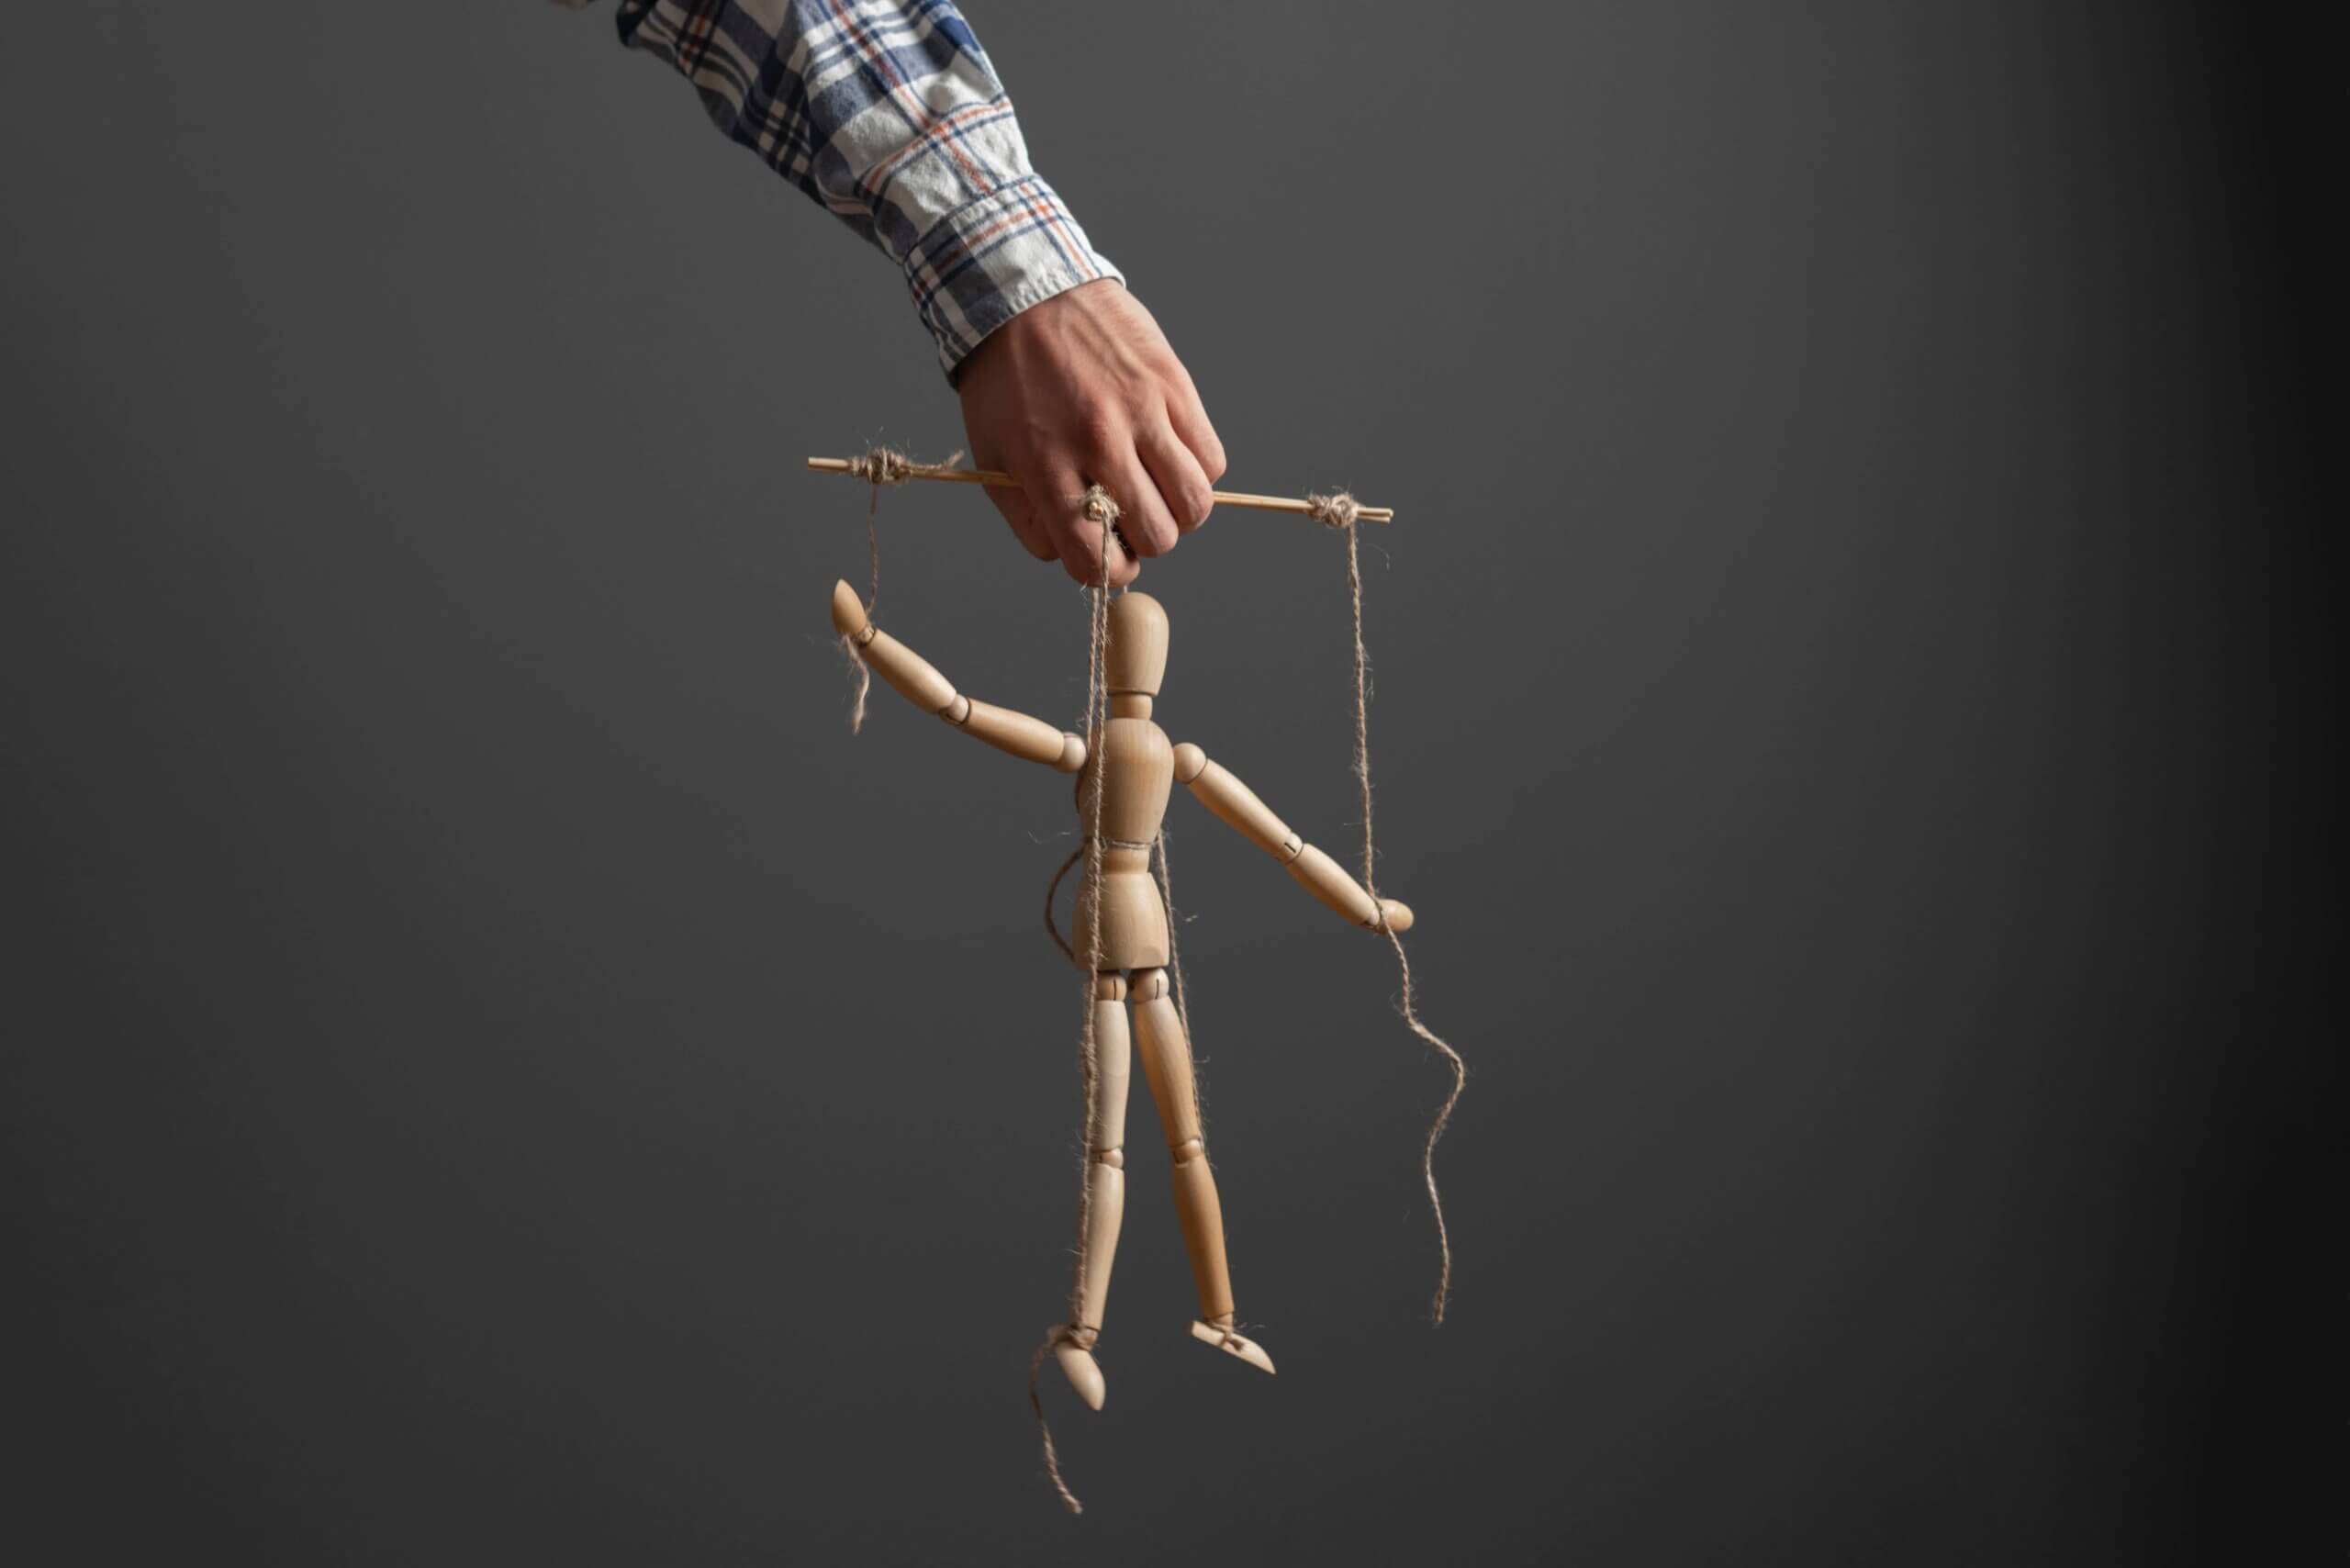 the emploee holding a marionette wooden doll, manipulation concept